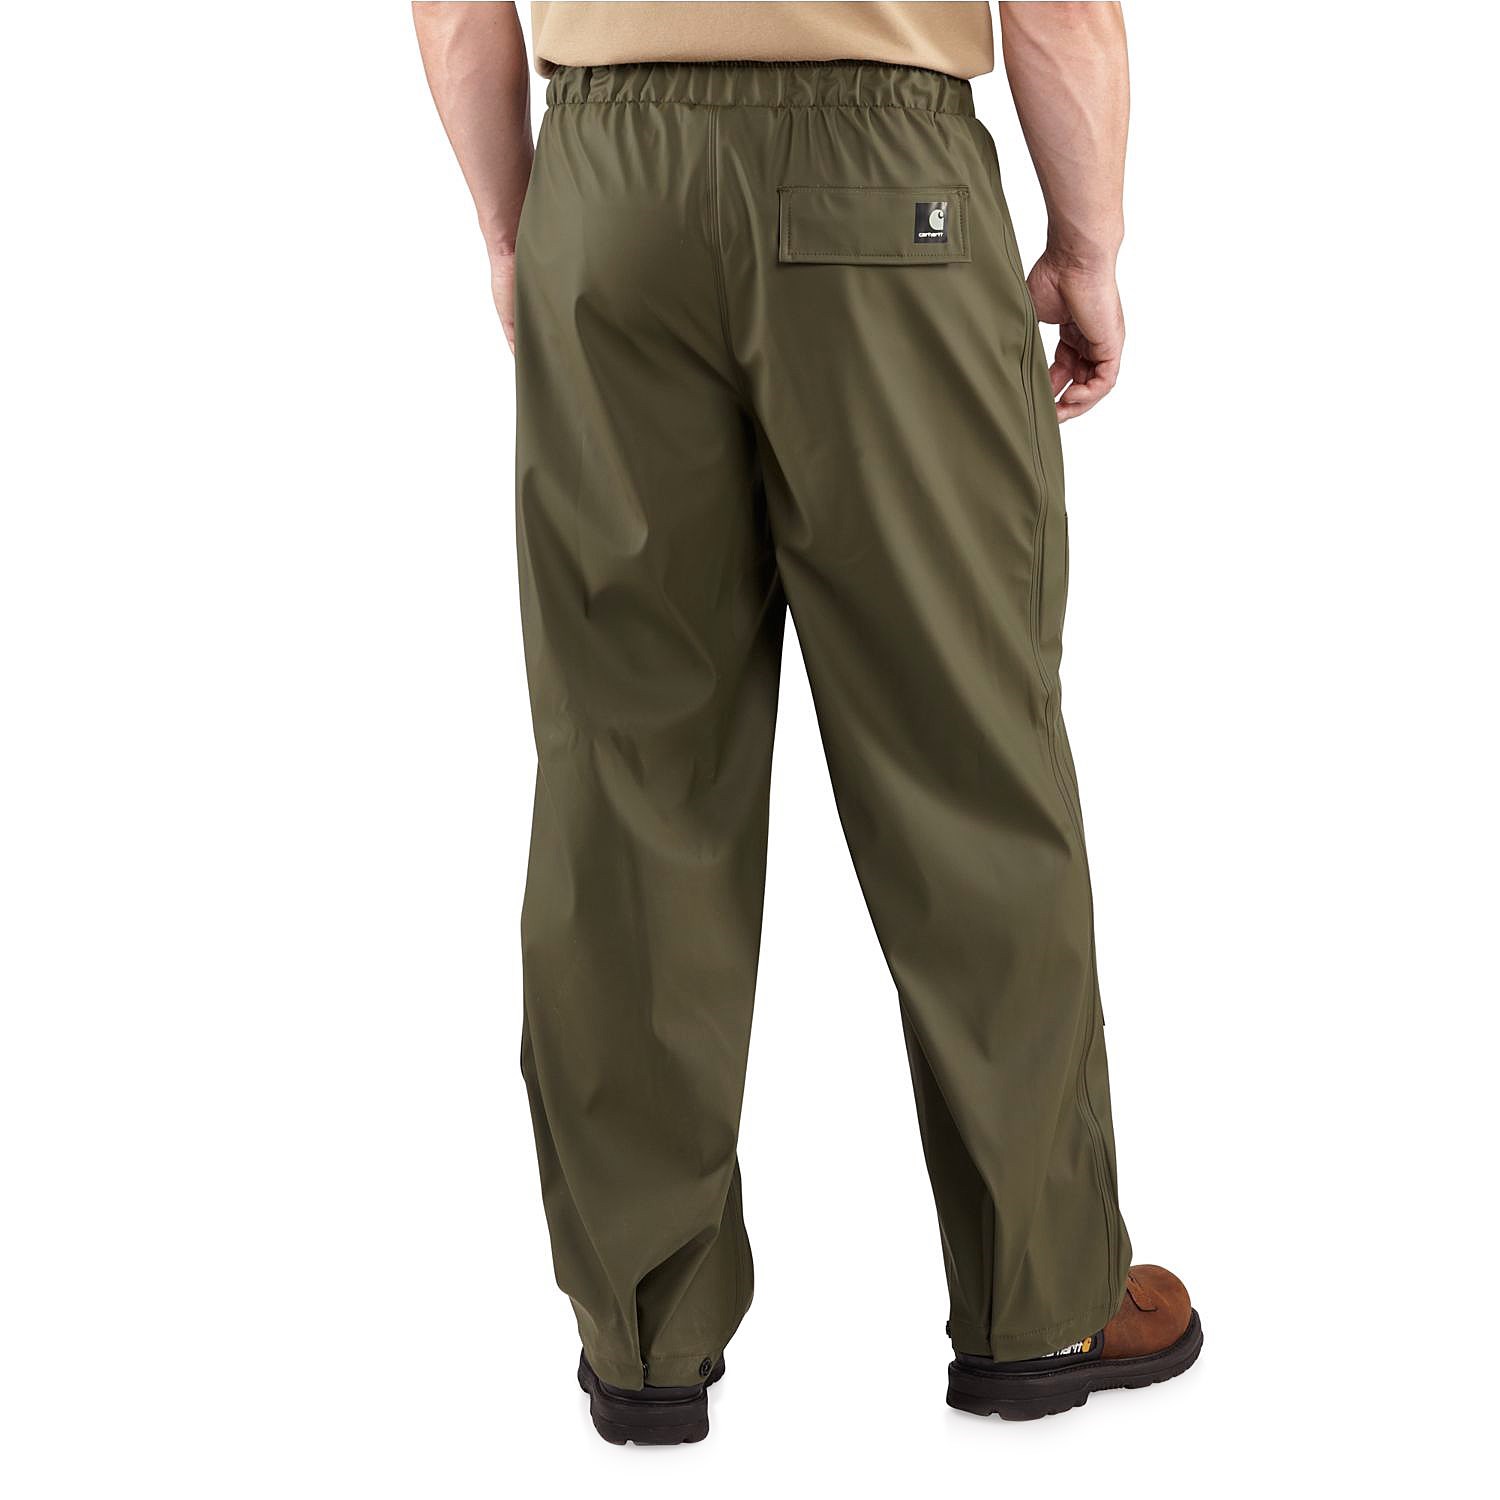 Carhartt Medford Pants (For Big and Tall Men) 8337Y